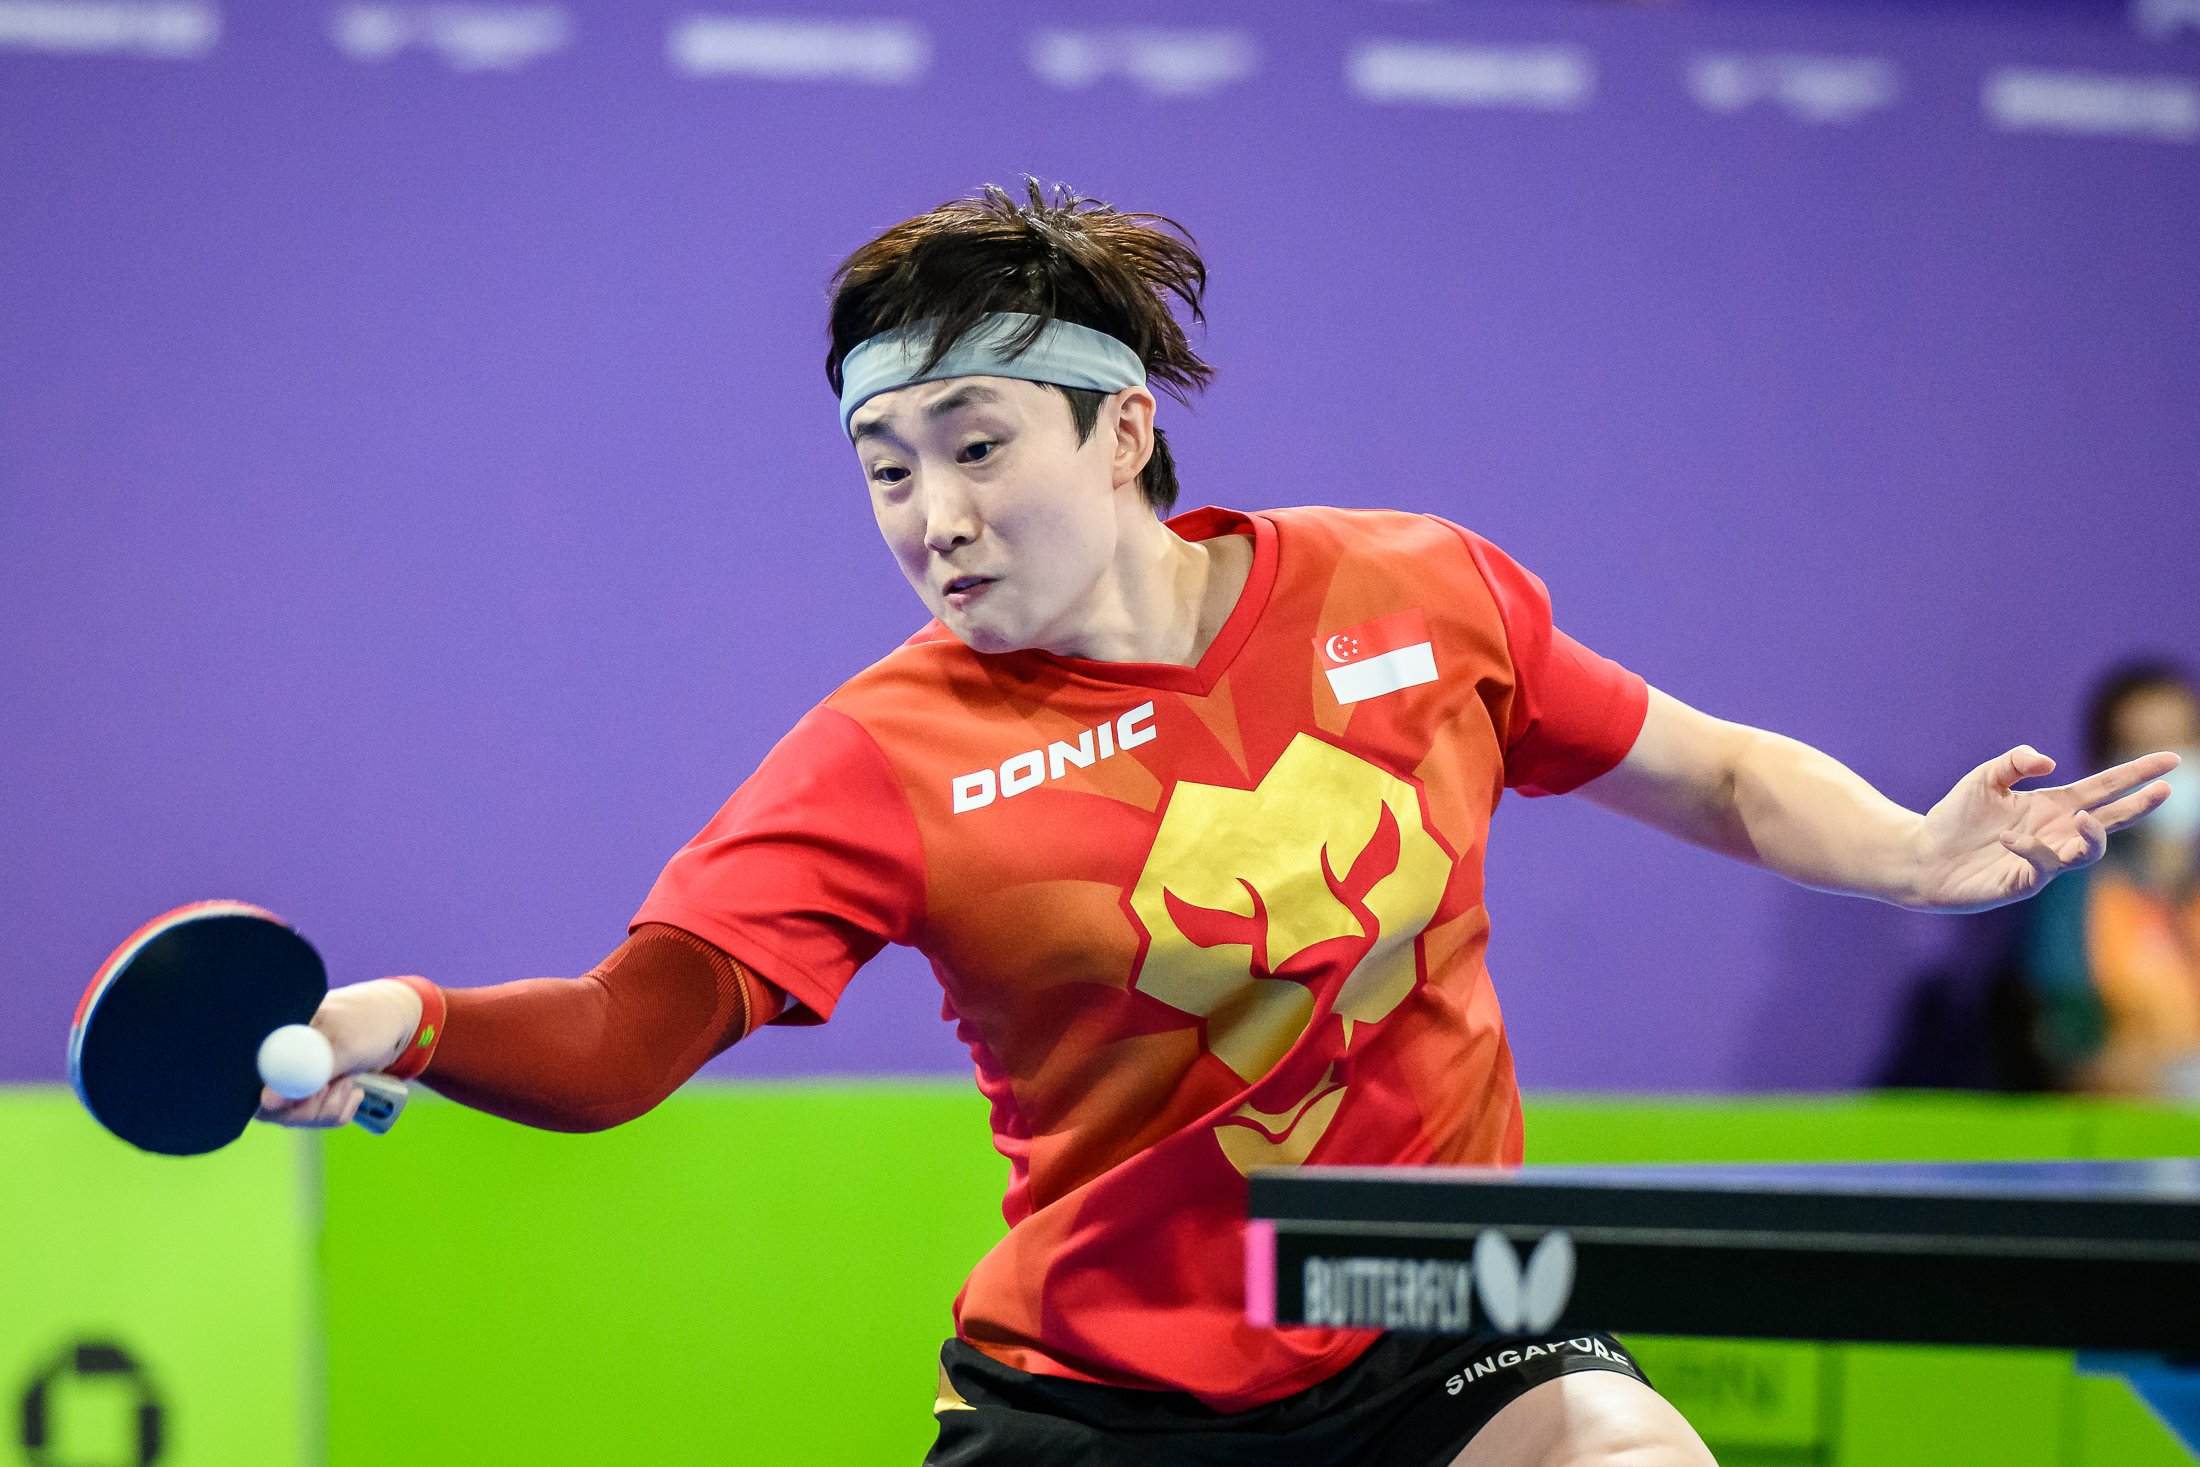 20220731_-_Table Tennis Photo by Andy Chua_051